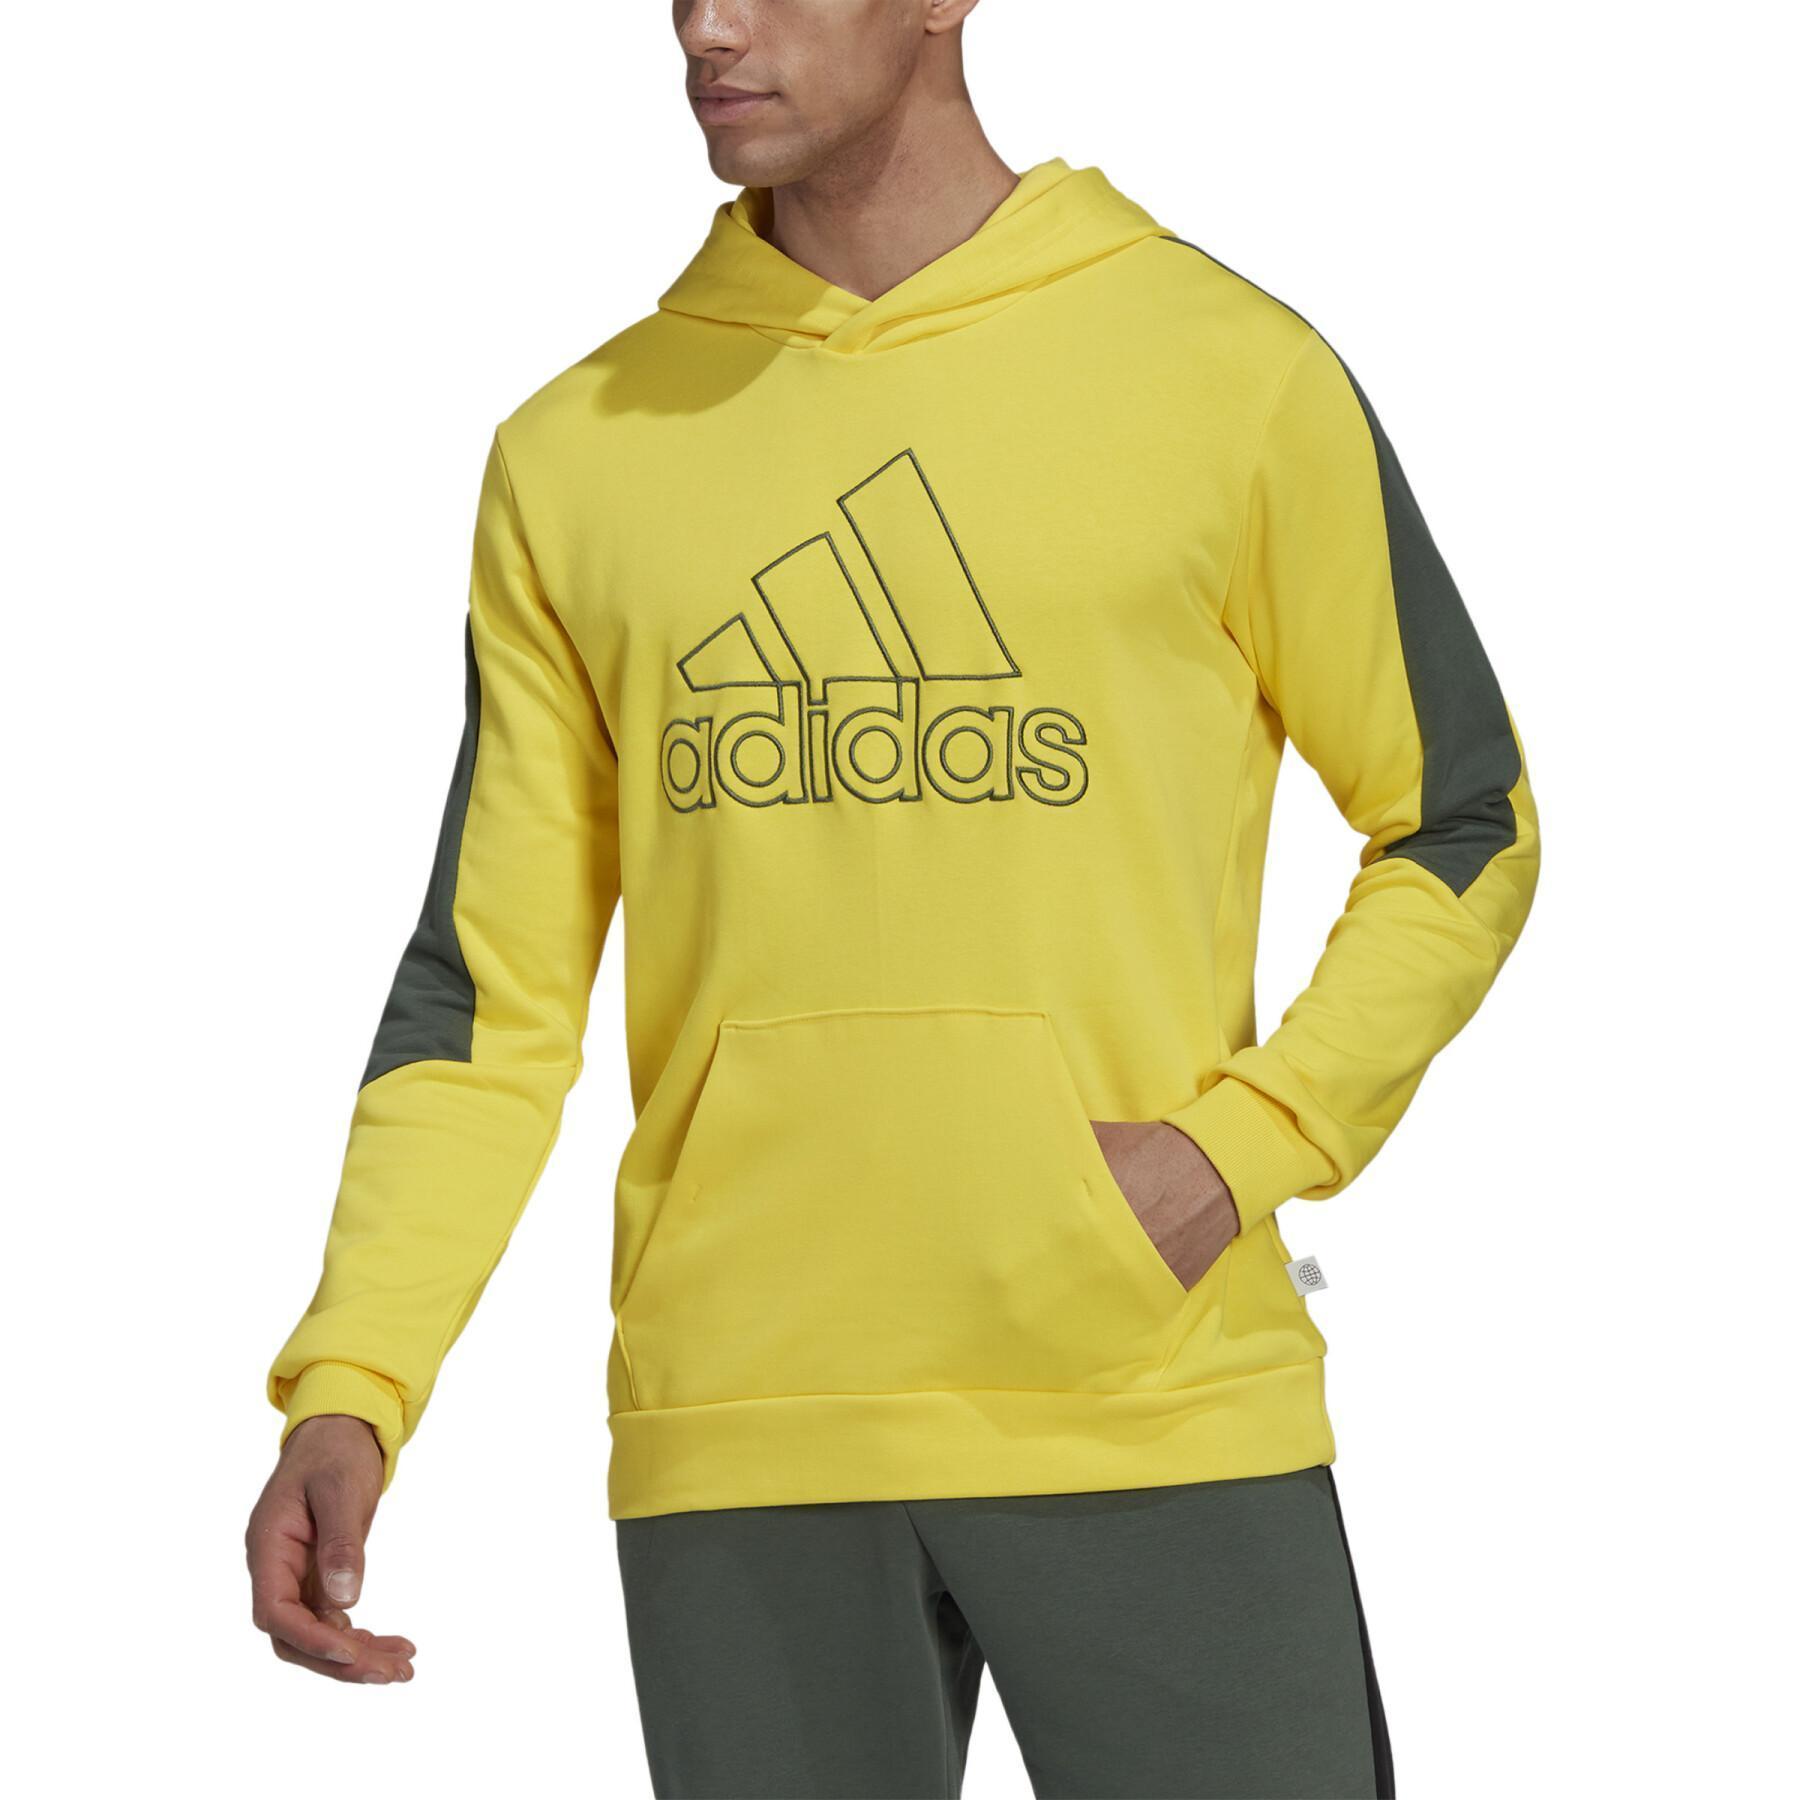 Hooded sweatshirt with embroidered patch adidas Future Icons